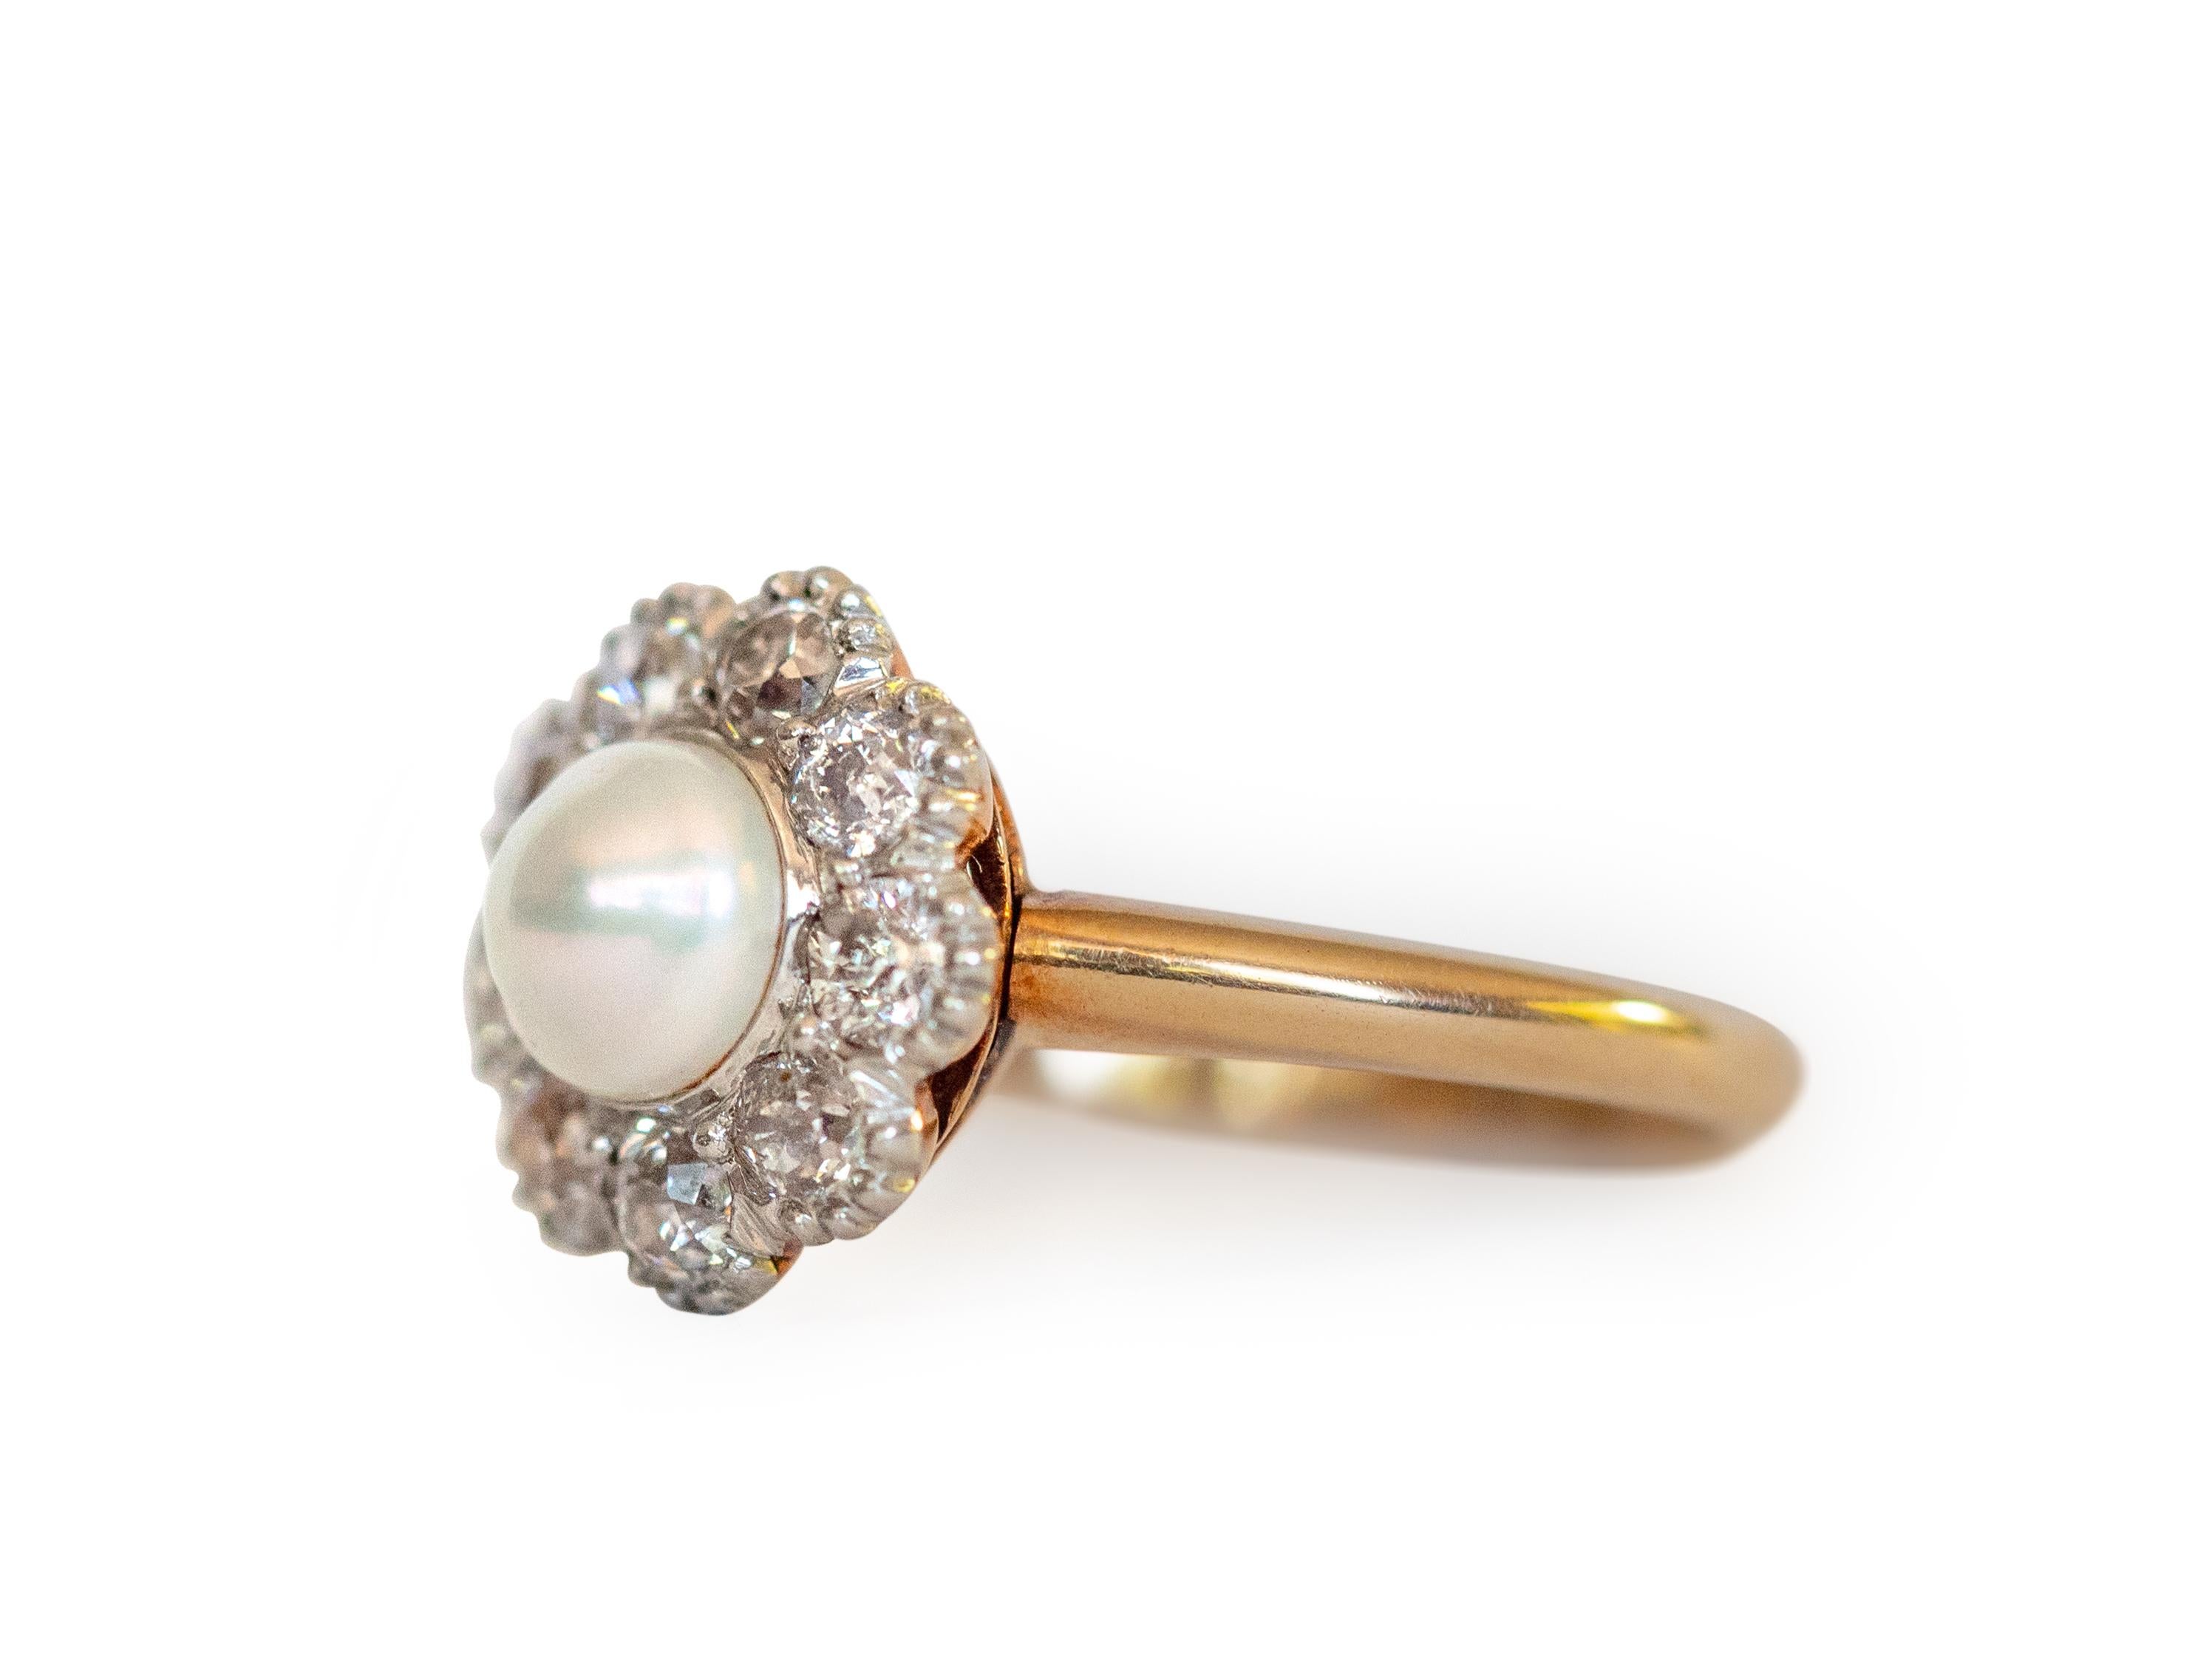 Ring Size: 4.75
Metal Type: 14K Yellow Gold and Plat  [Hallmarked, and Tested]
Weight:  2.4 grams

Center Stone Details:
Type: Pearl
Weight: .75 carat approximative 

Side Diamond Details:
Weight: .25 carat, total weight
Cut: Old European 
Color: